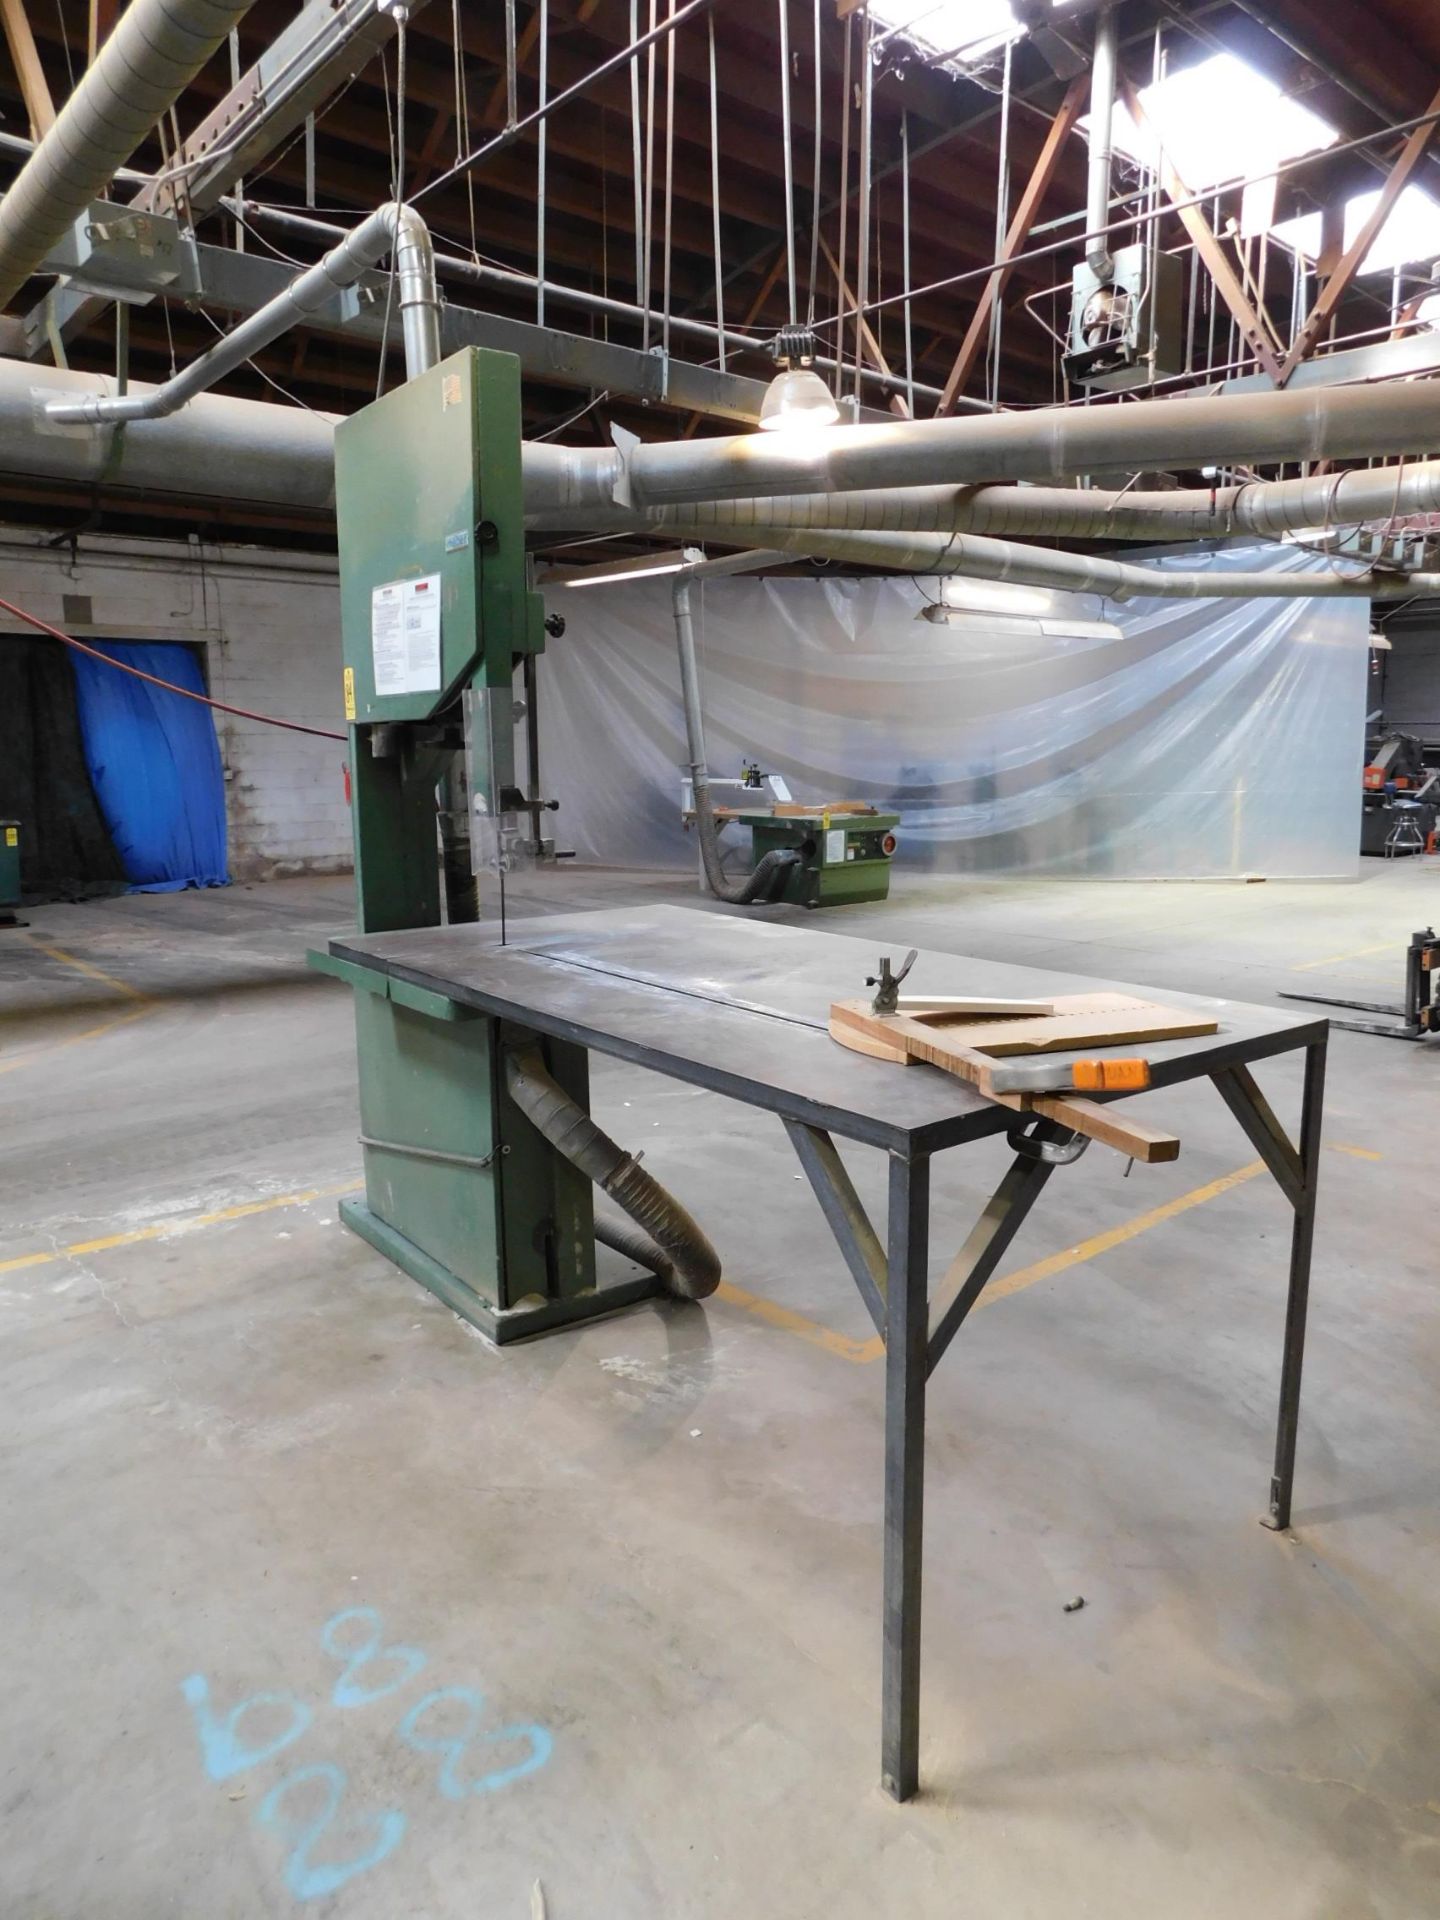 Meber Model 800, 32" Vertical Band Saw, s/n 3165, Infinite Radius Table from 2" - 72" - Image 2 of 7